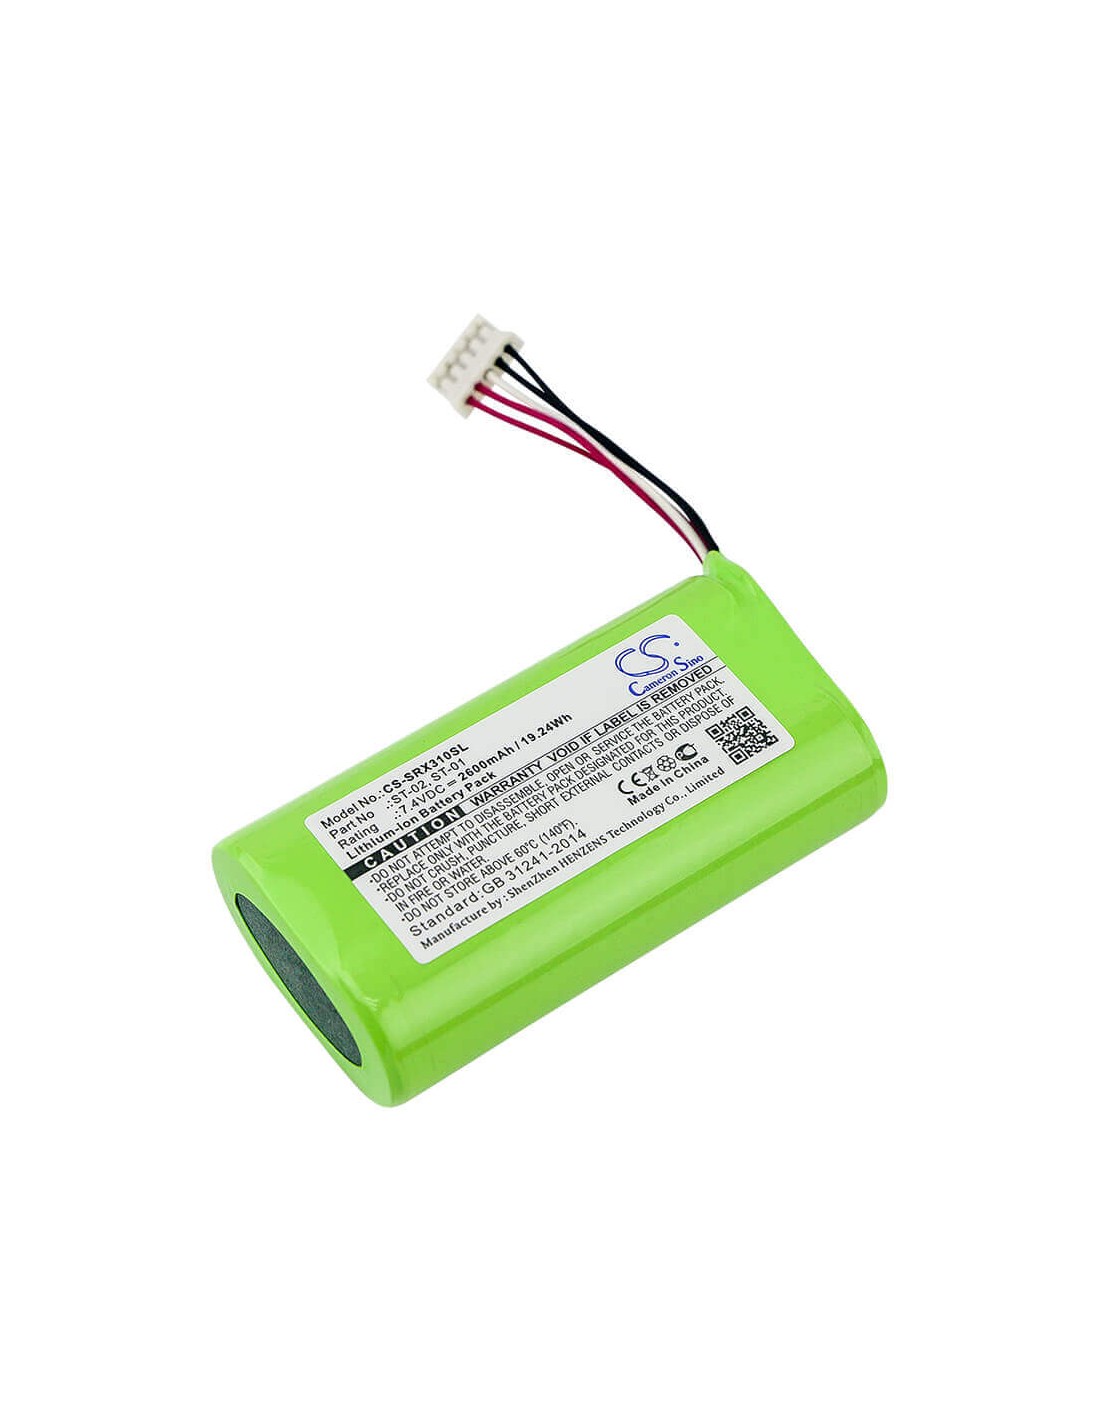 Battery for Sony Srs-x3 7.4V, 2600mAh - 19.24Wh